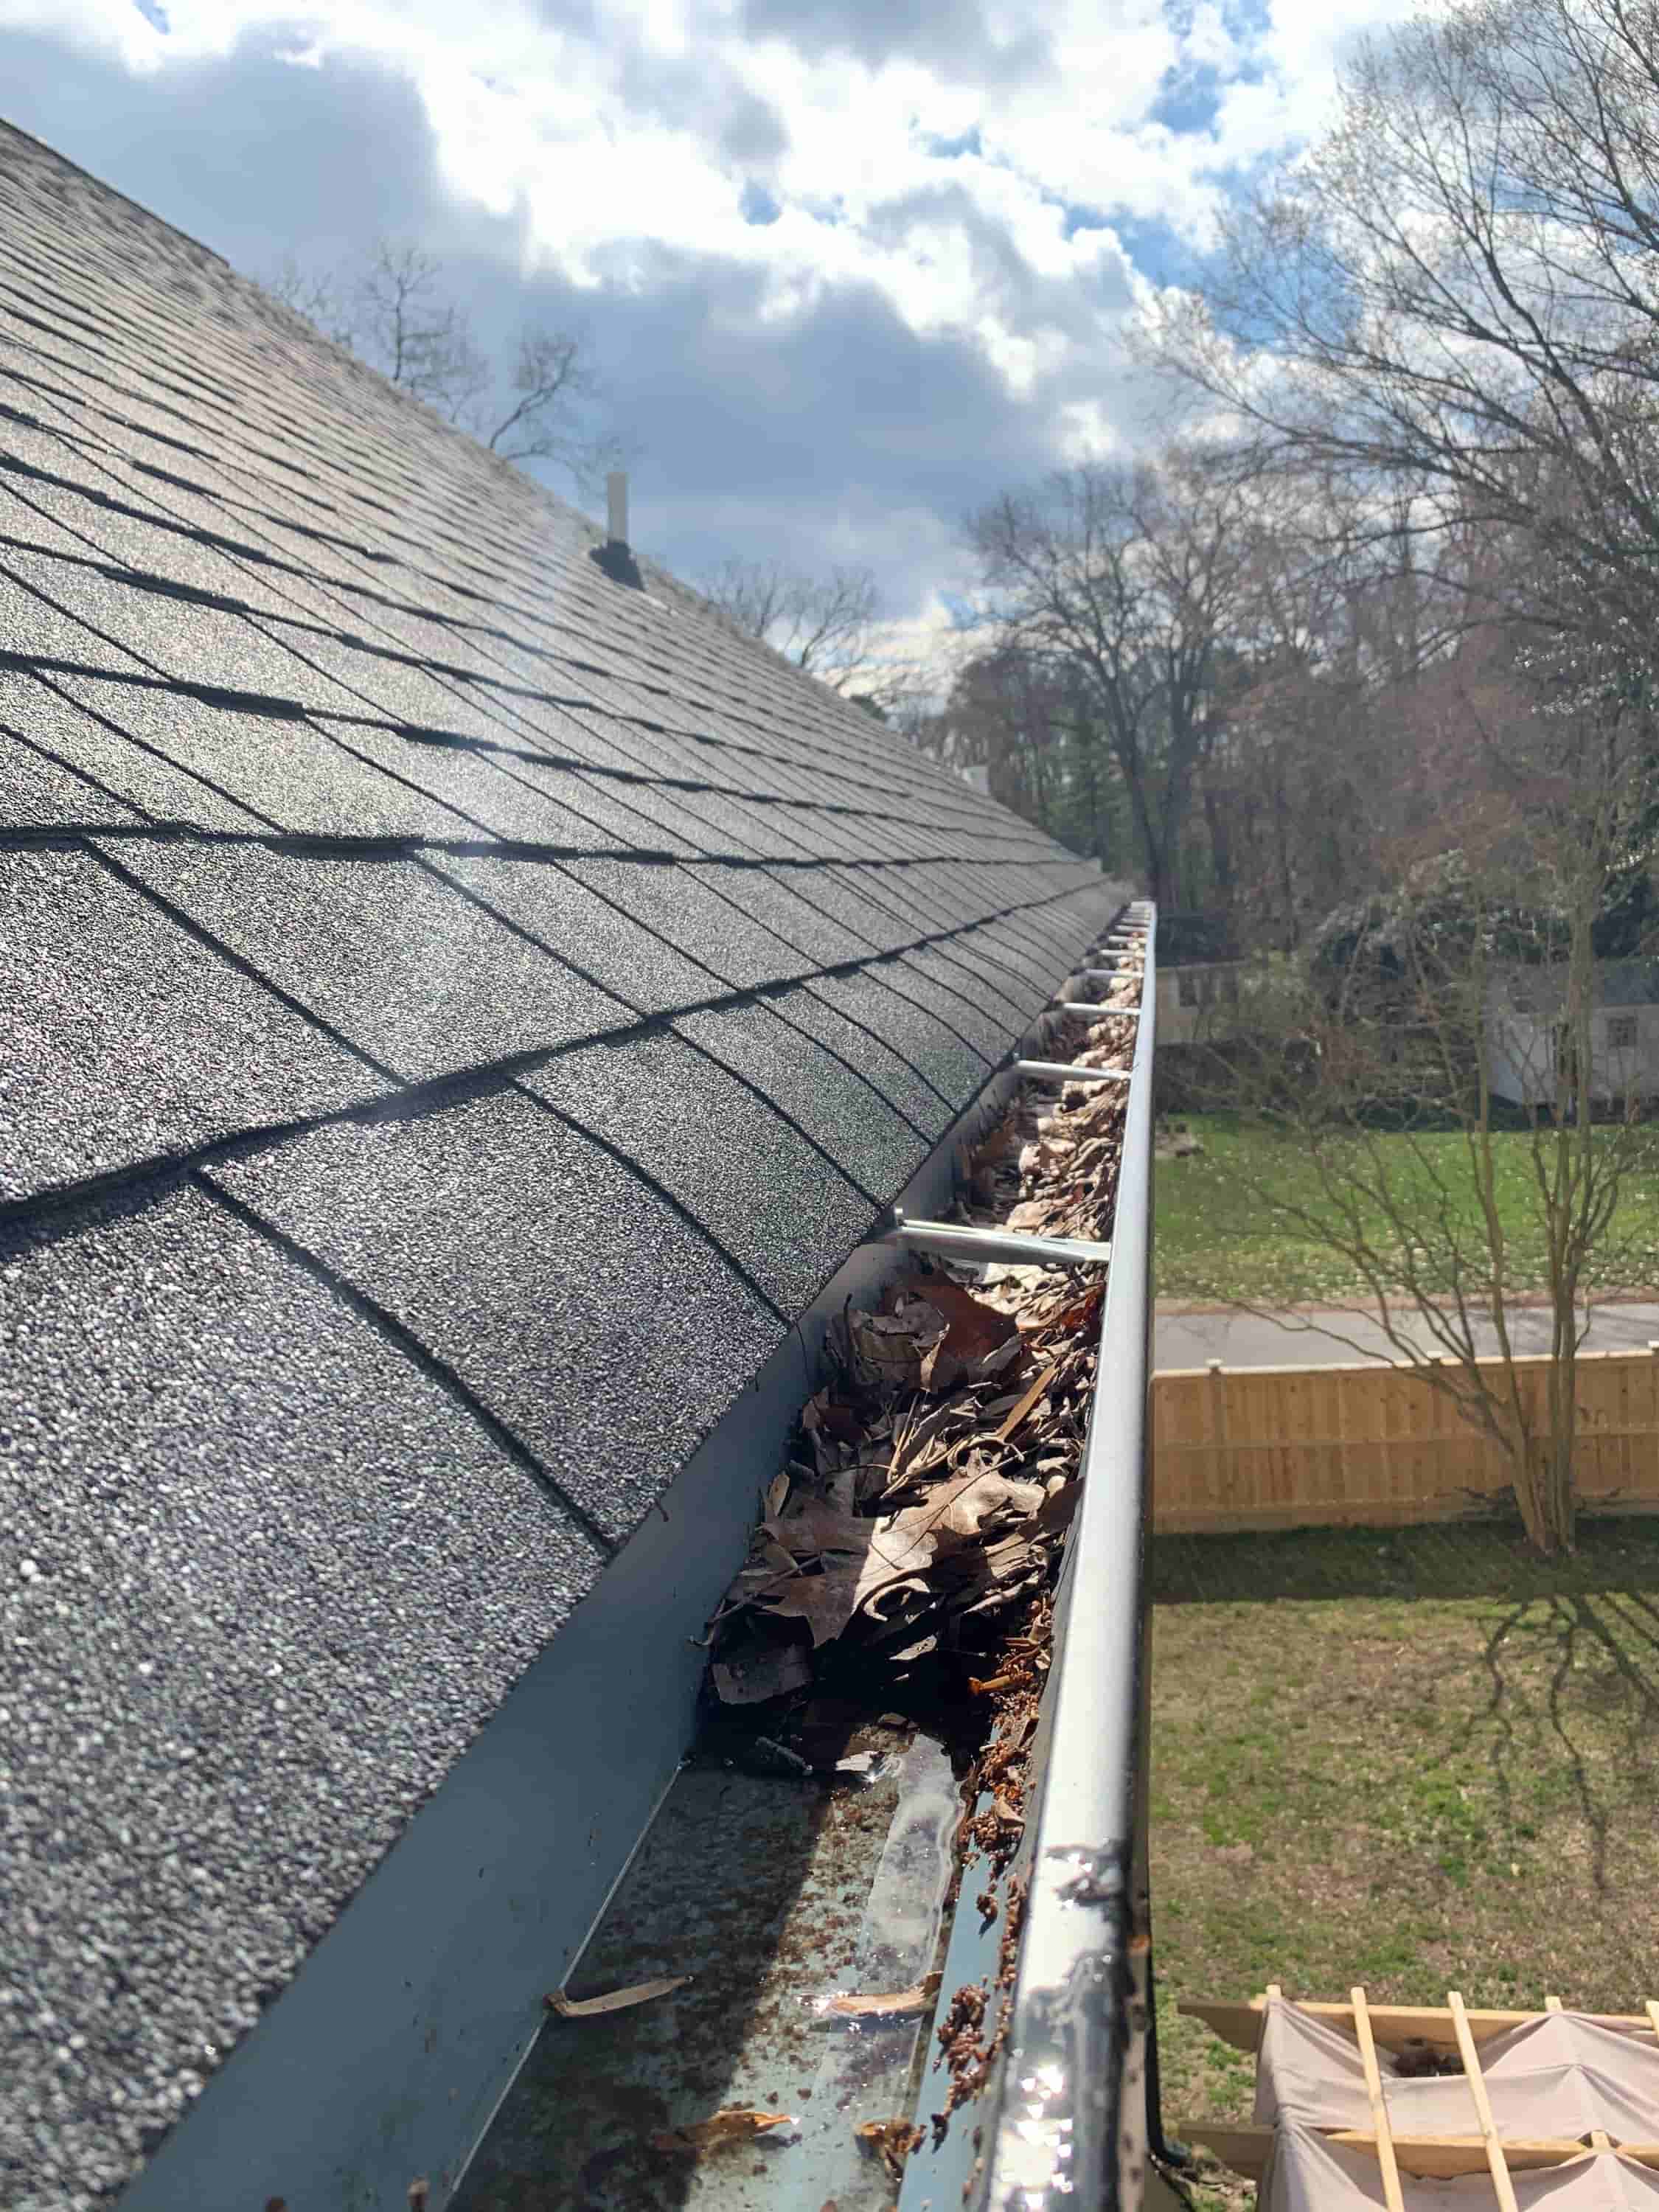 gutter cleaning service cost